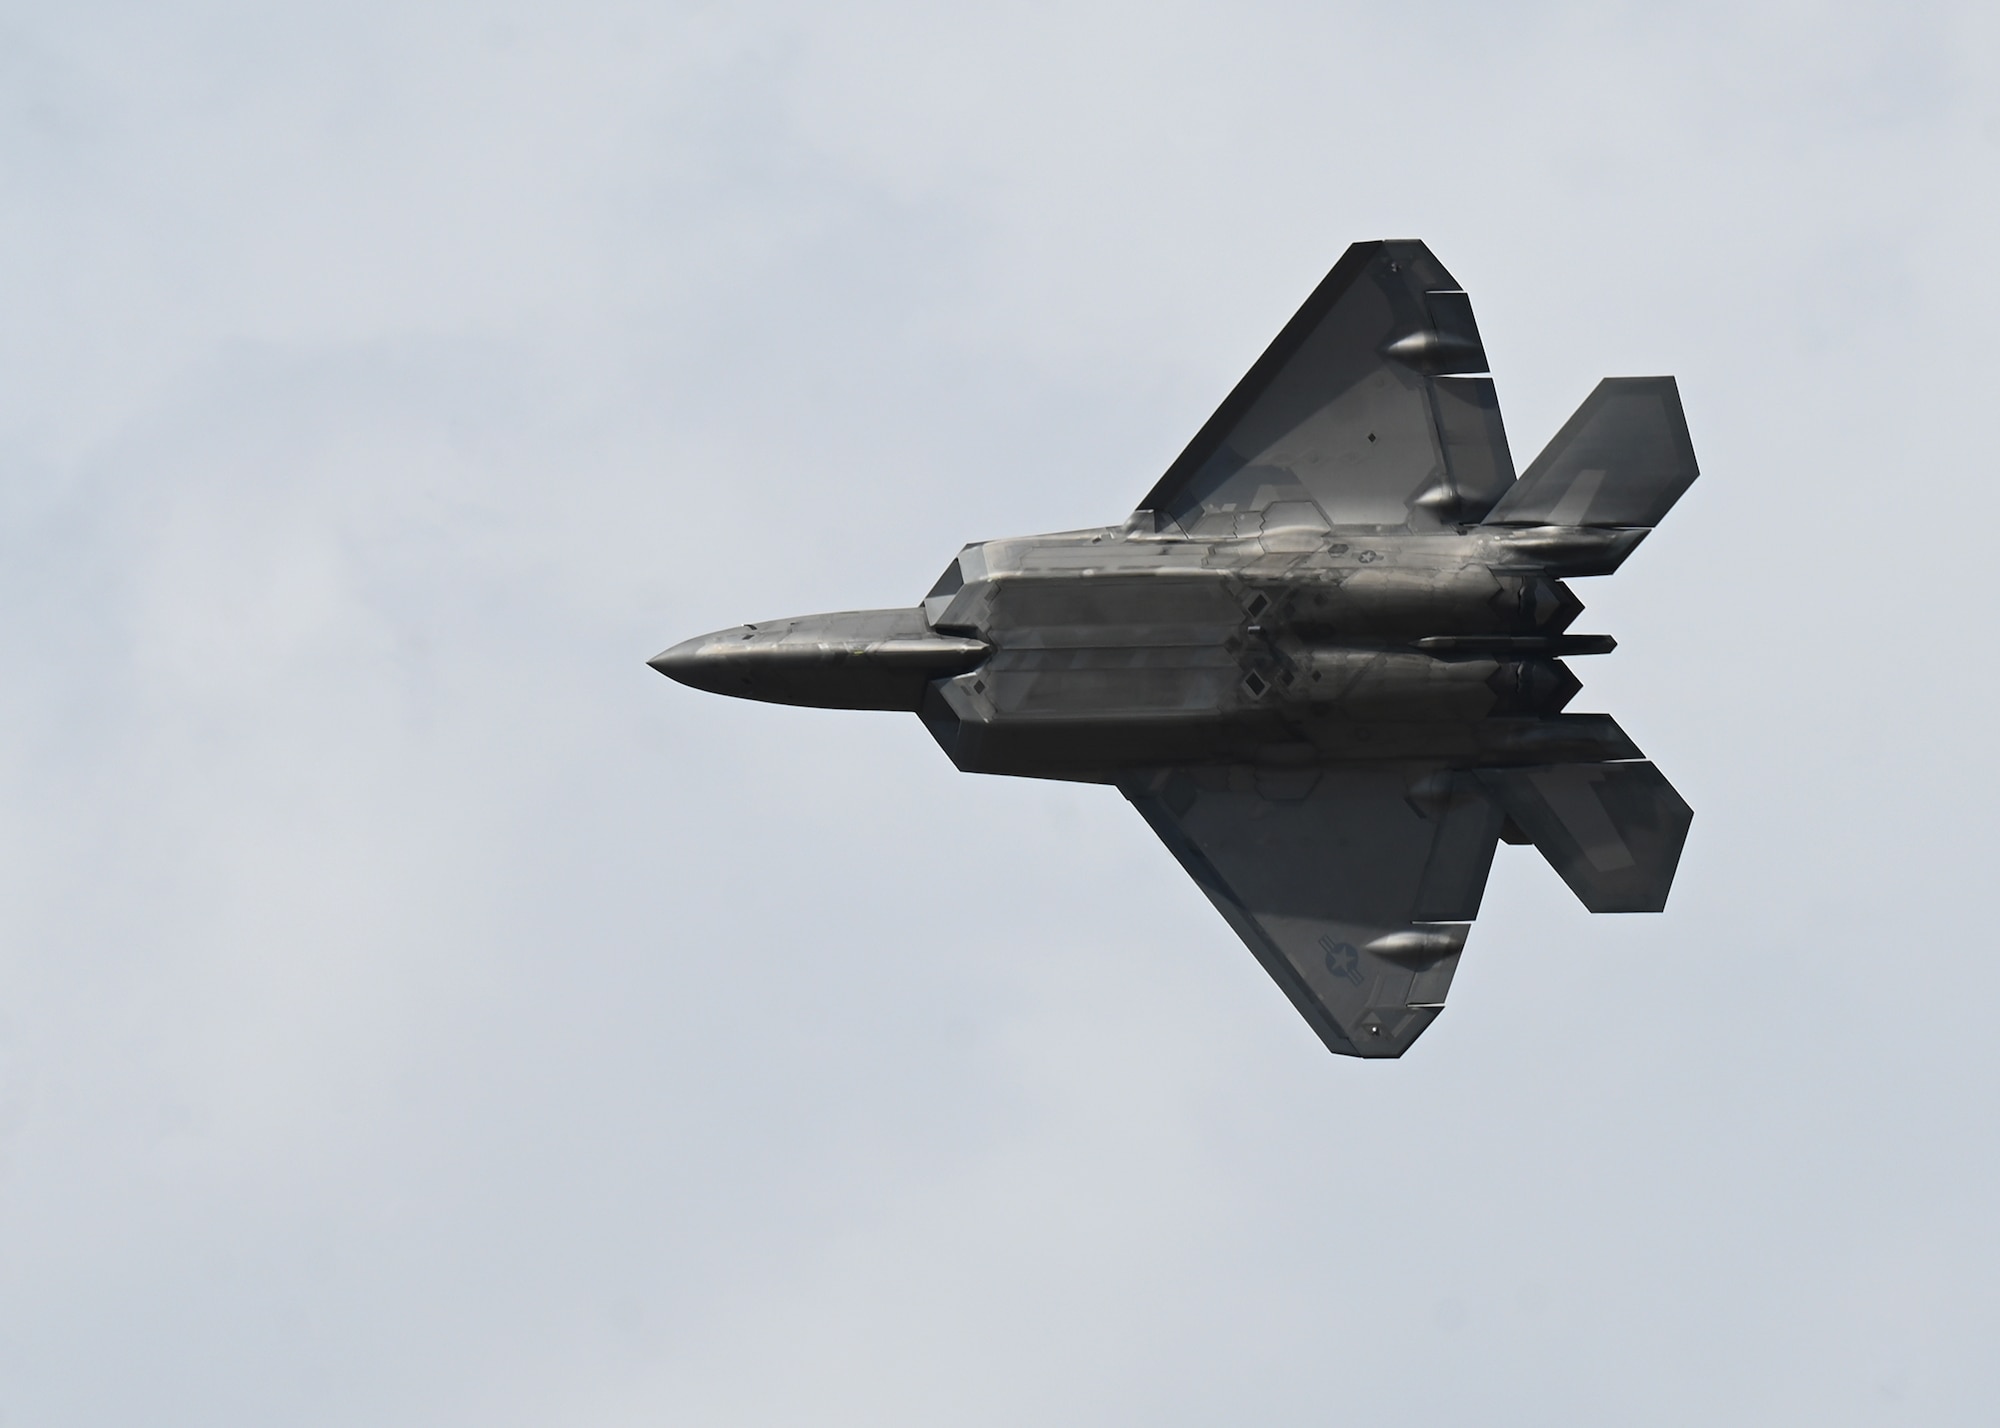 F-22 Raptor Demonstration Team commander and pilot, performs an aerial maneuver during the Feria Internacional del Aire y del Espacio international air and space show, at Pudahuel Air Base, Chile.